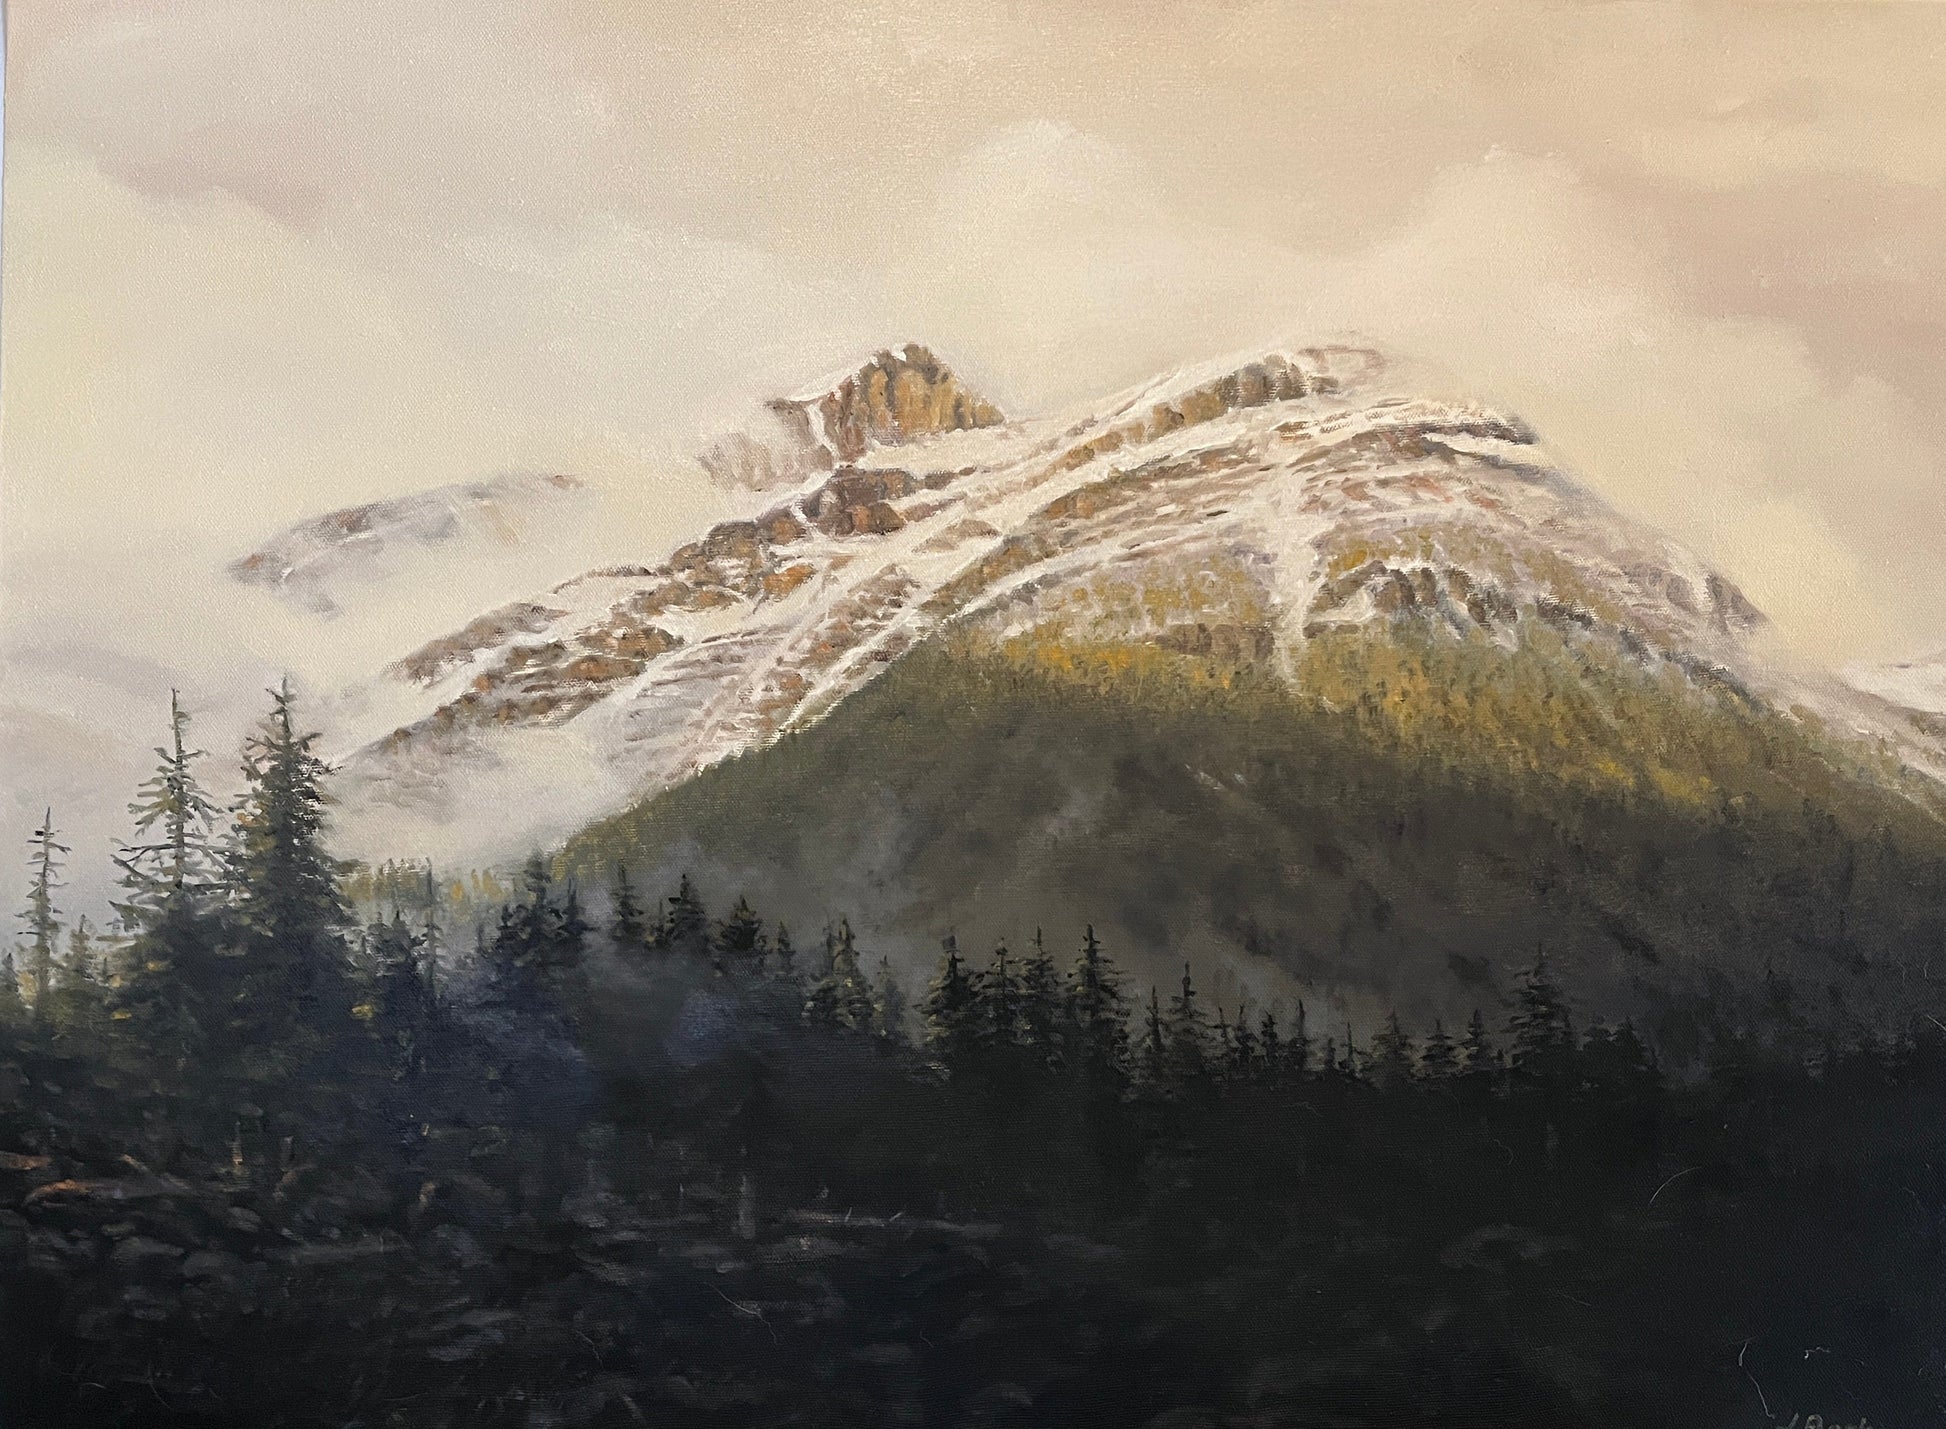 November in the Rocky Mountains-Painting-Jim Bagley-Sorrel Sky Gallery